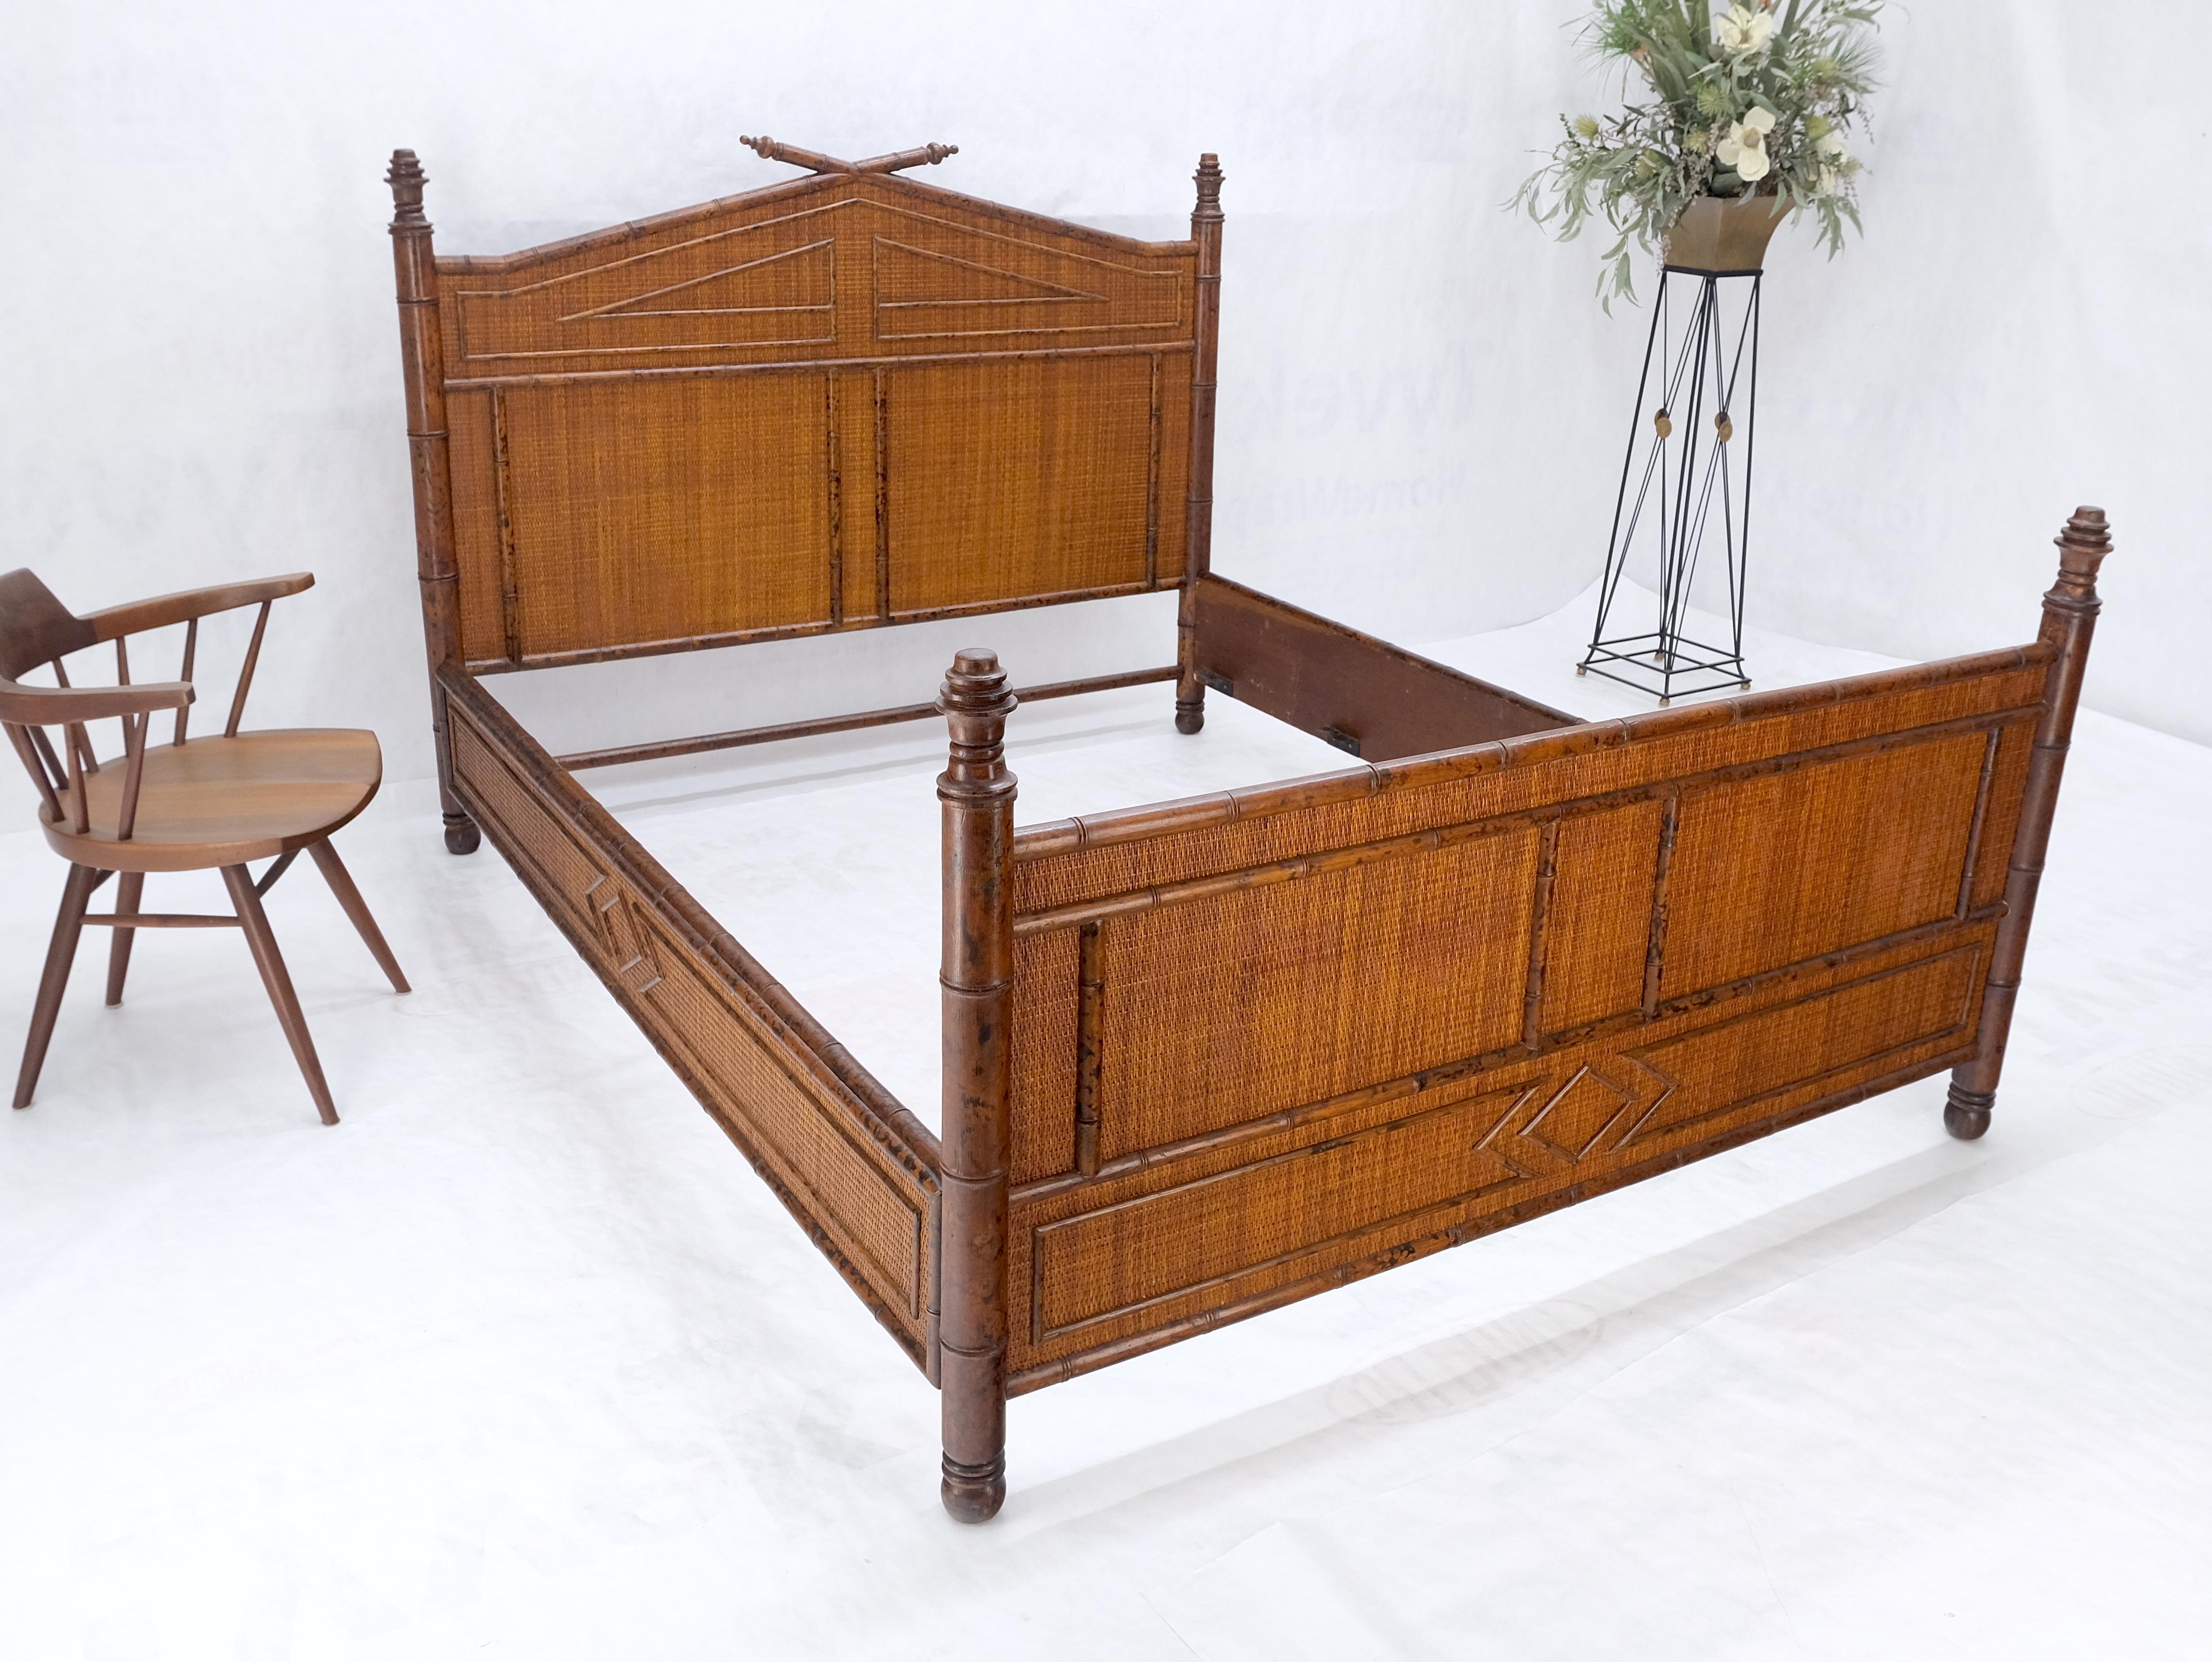 20th Century Faux Bamboo Cane Restored Queen Size Headboard Footboard Bed Bloomingdales MINT For Sale